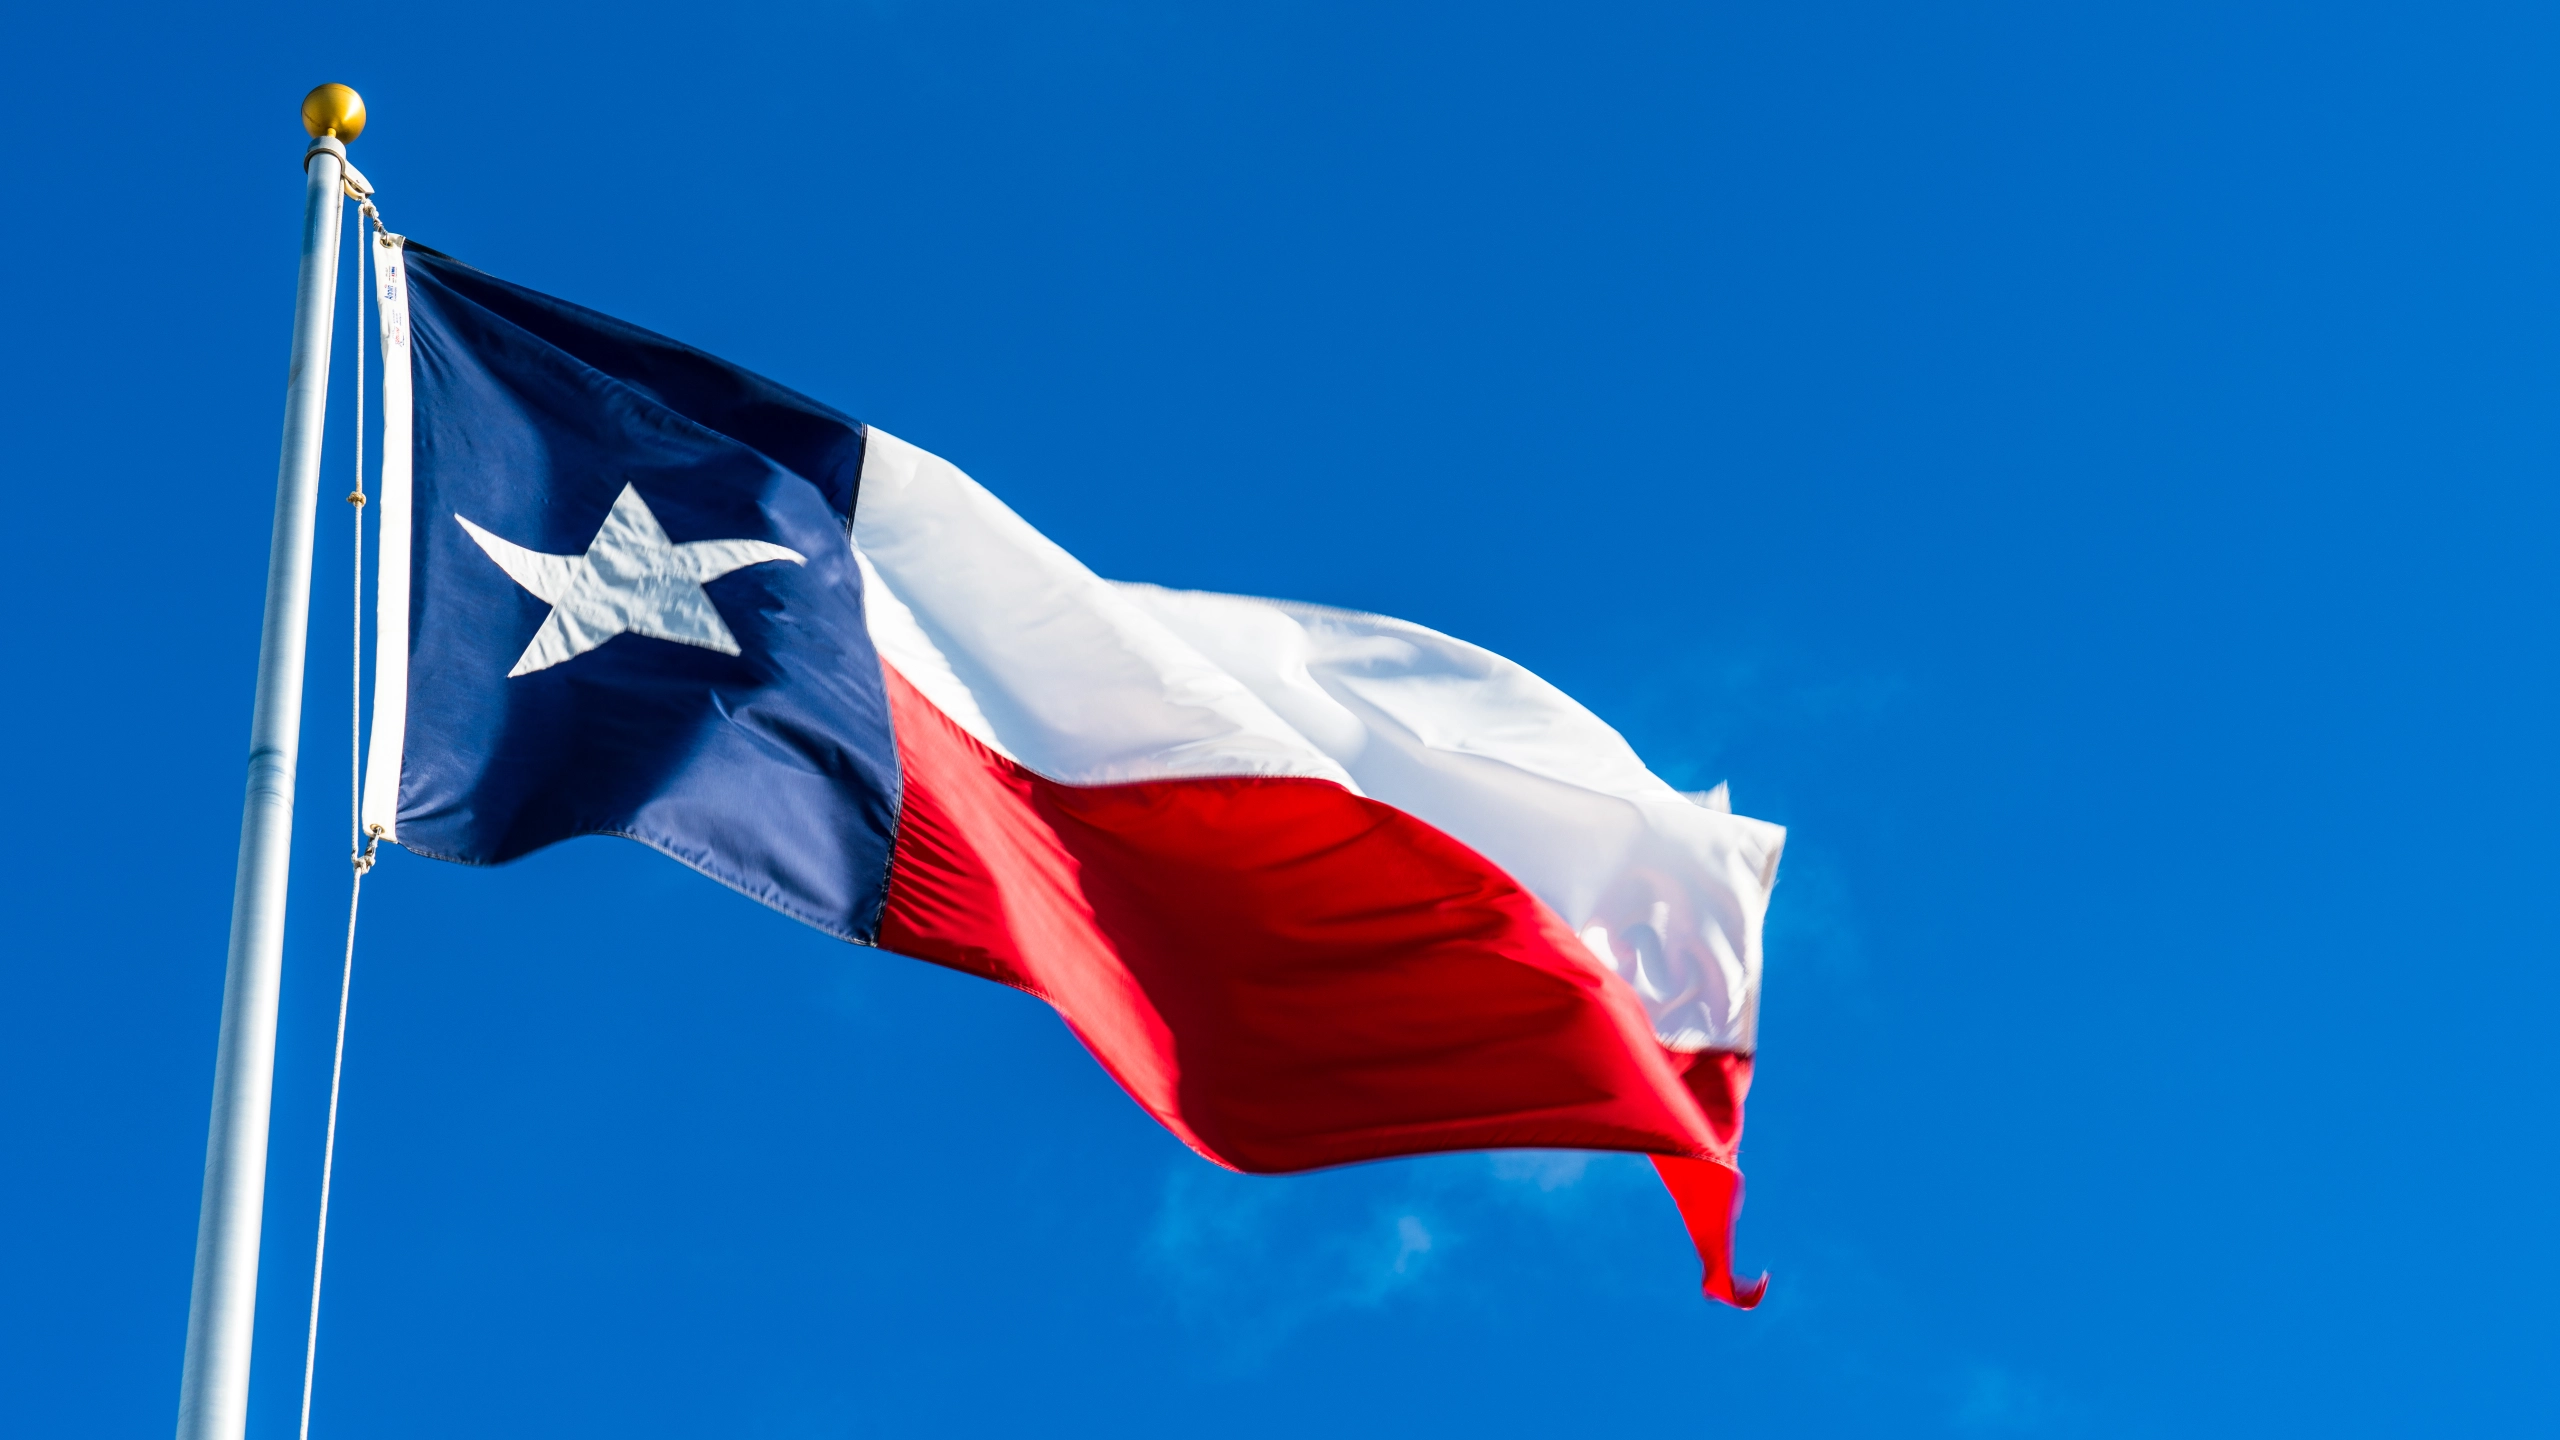 Spending on China Tech Troubling, But Texas Is Taking Action